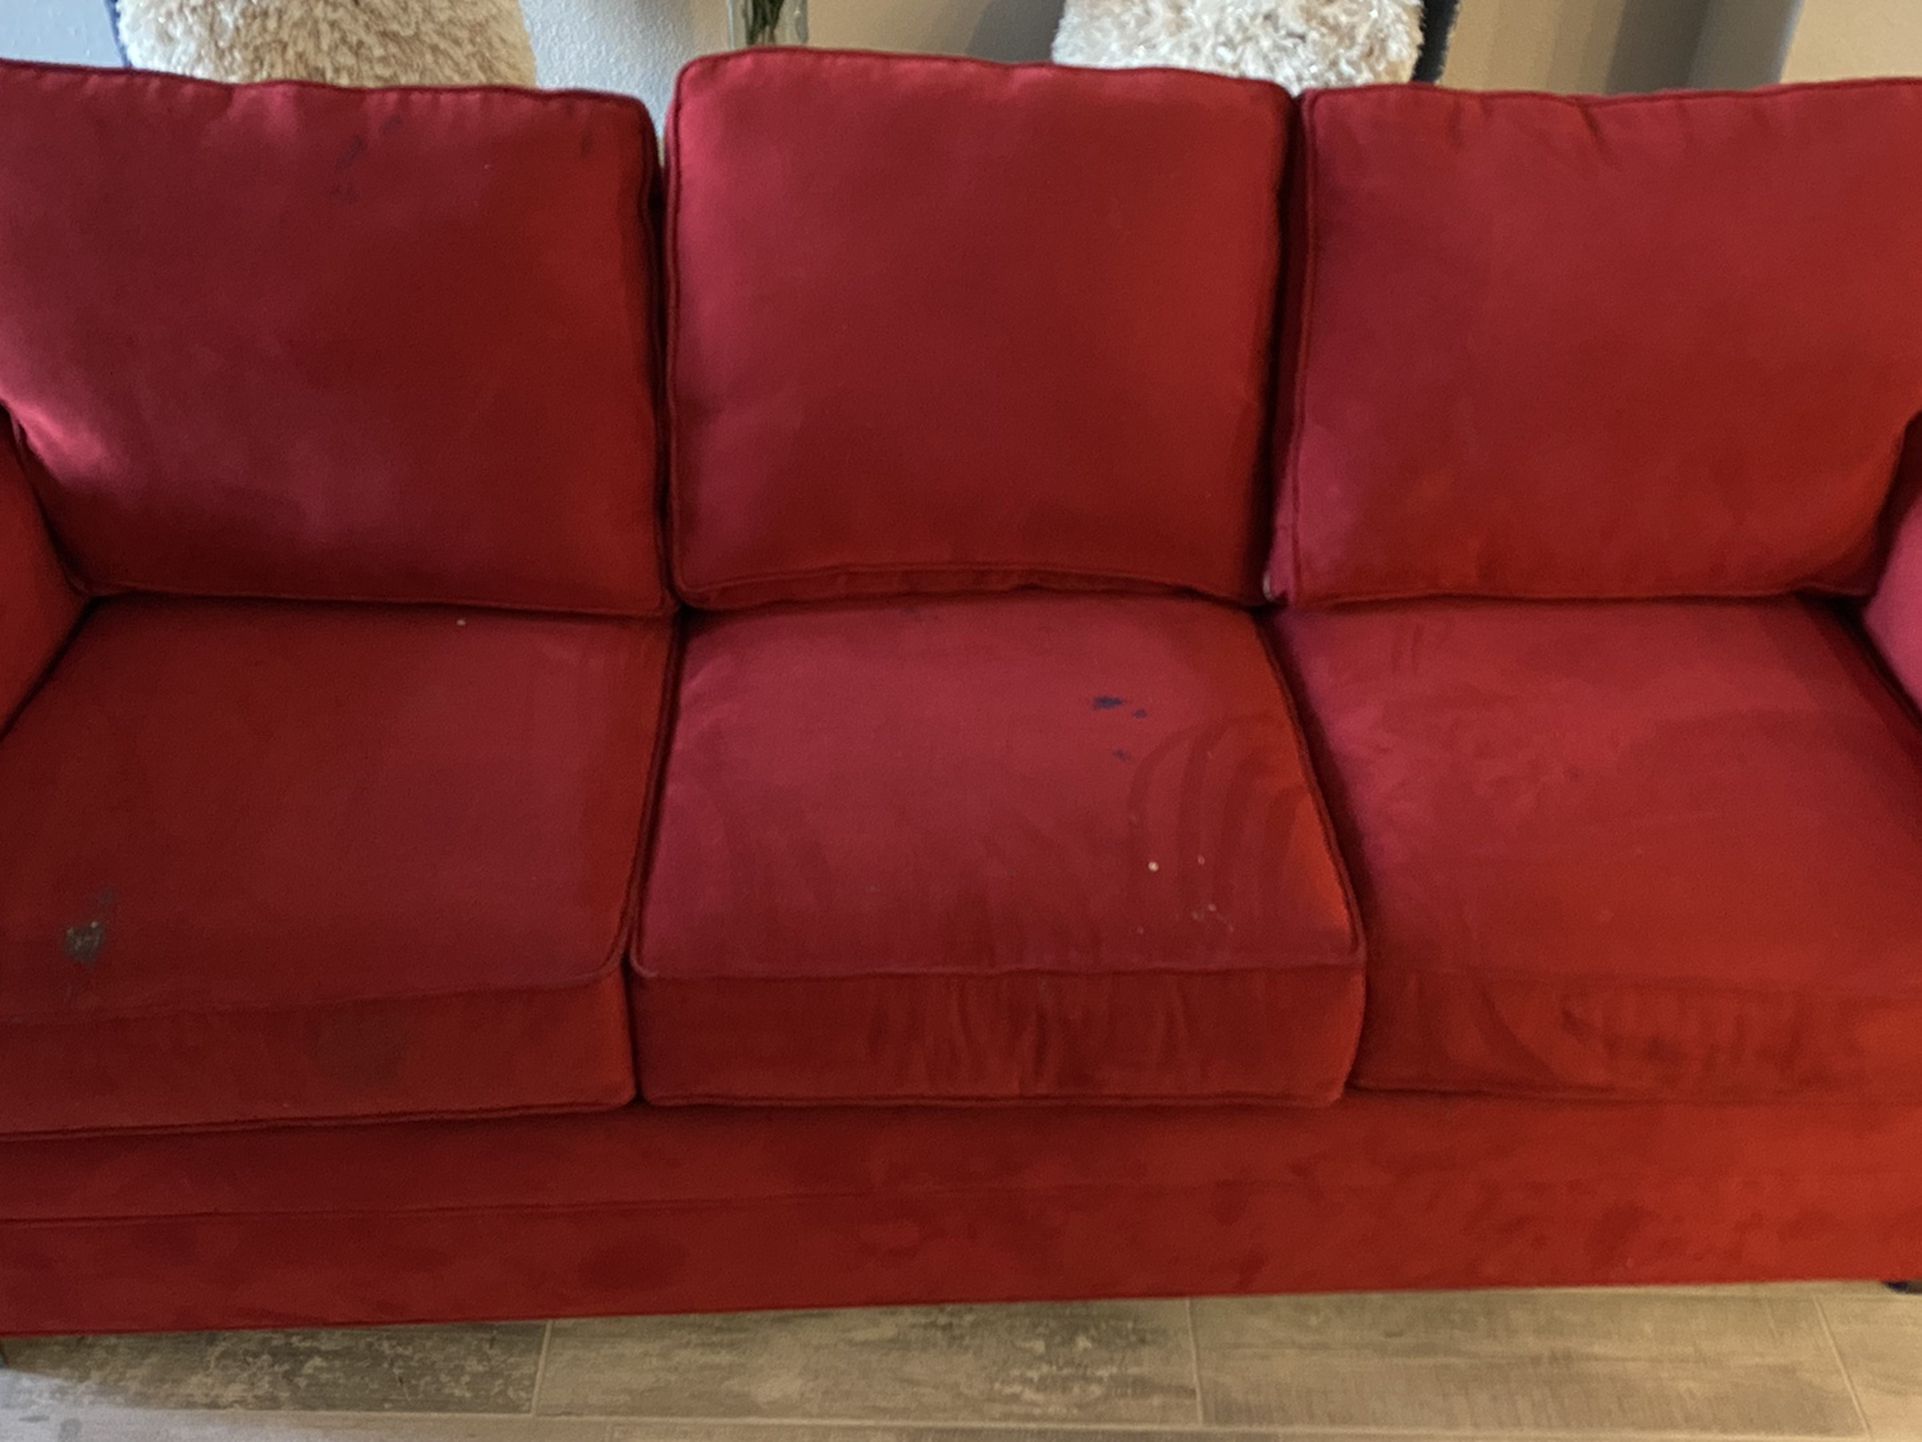 Free Red Couch/Sleeper Queen